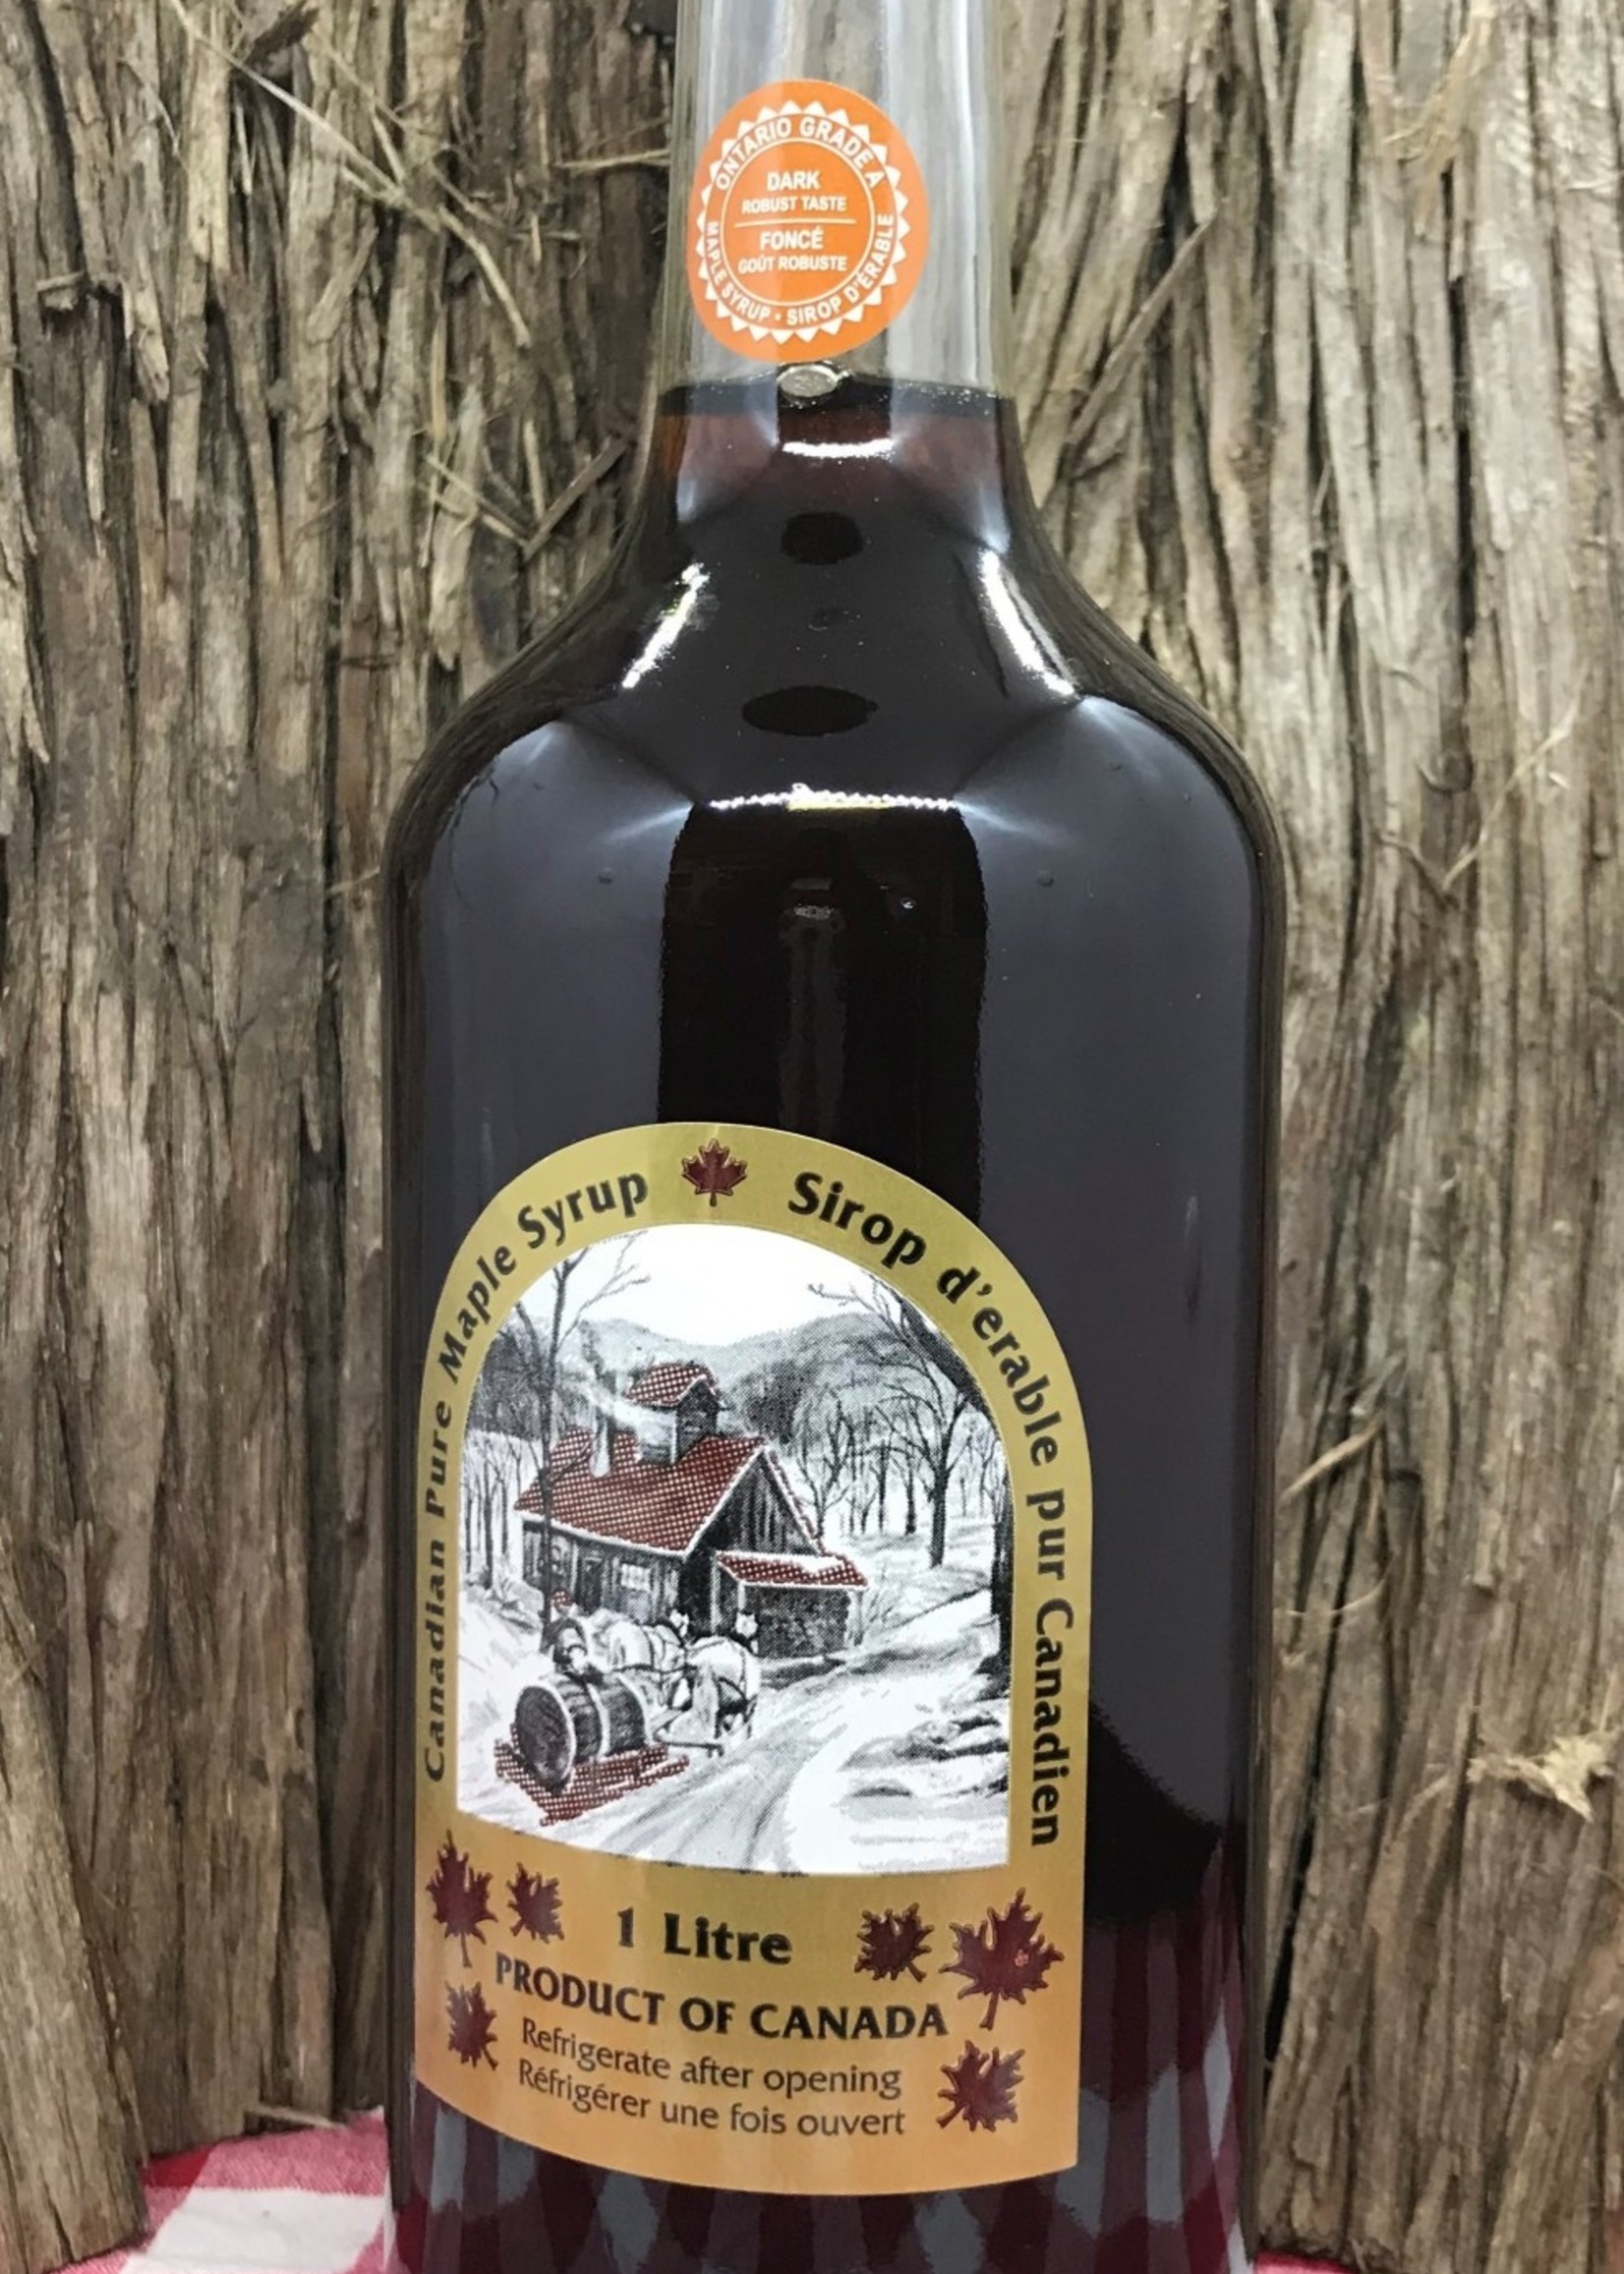 Ken Green Maple Syrup